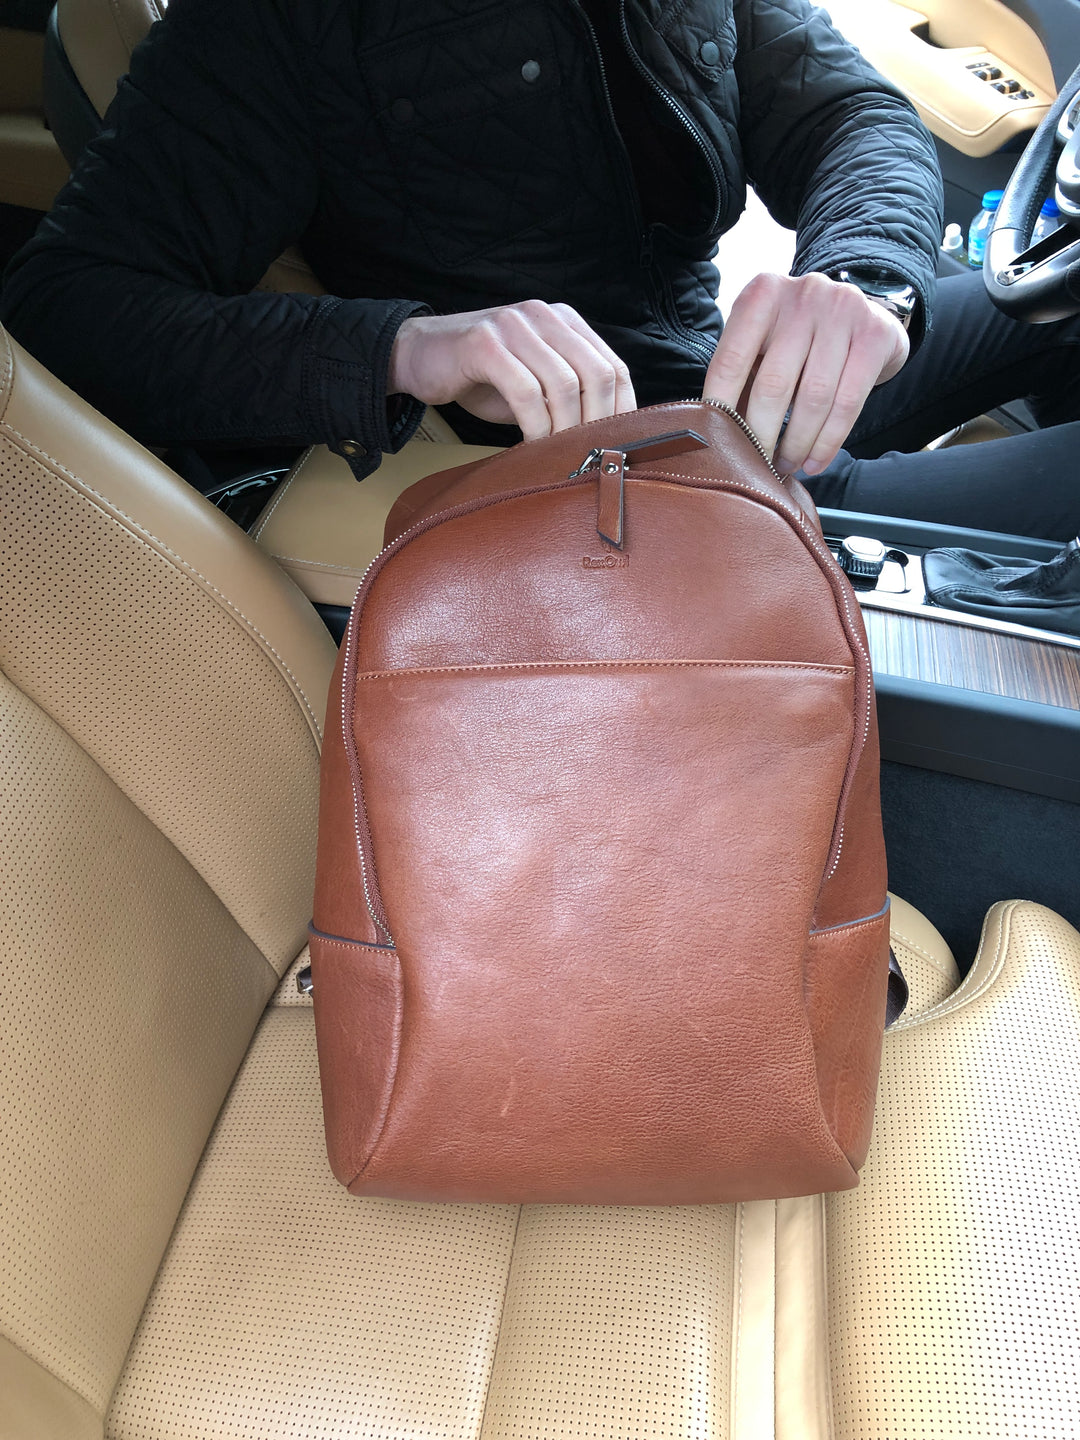 Voyager Leather Backpack - Tan